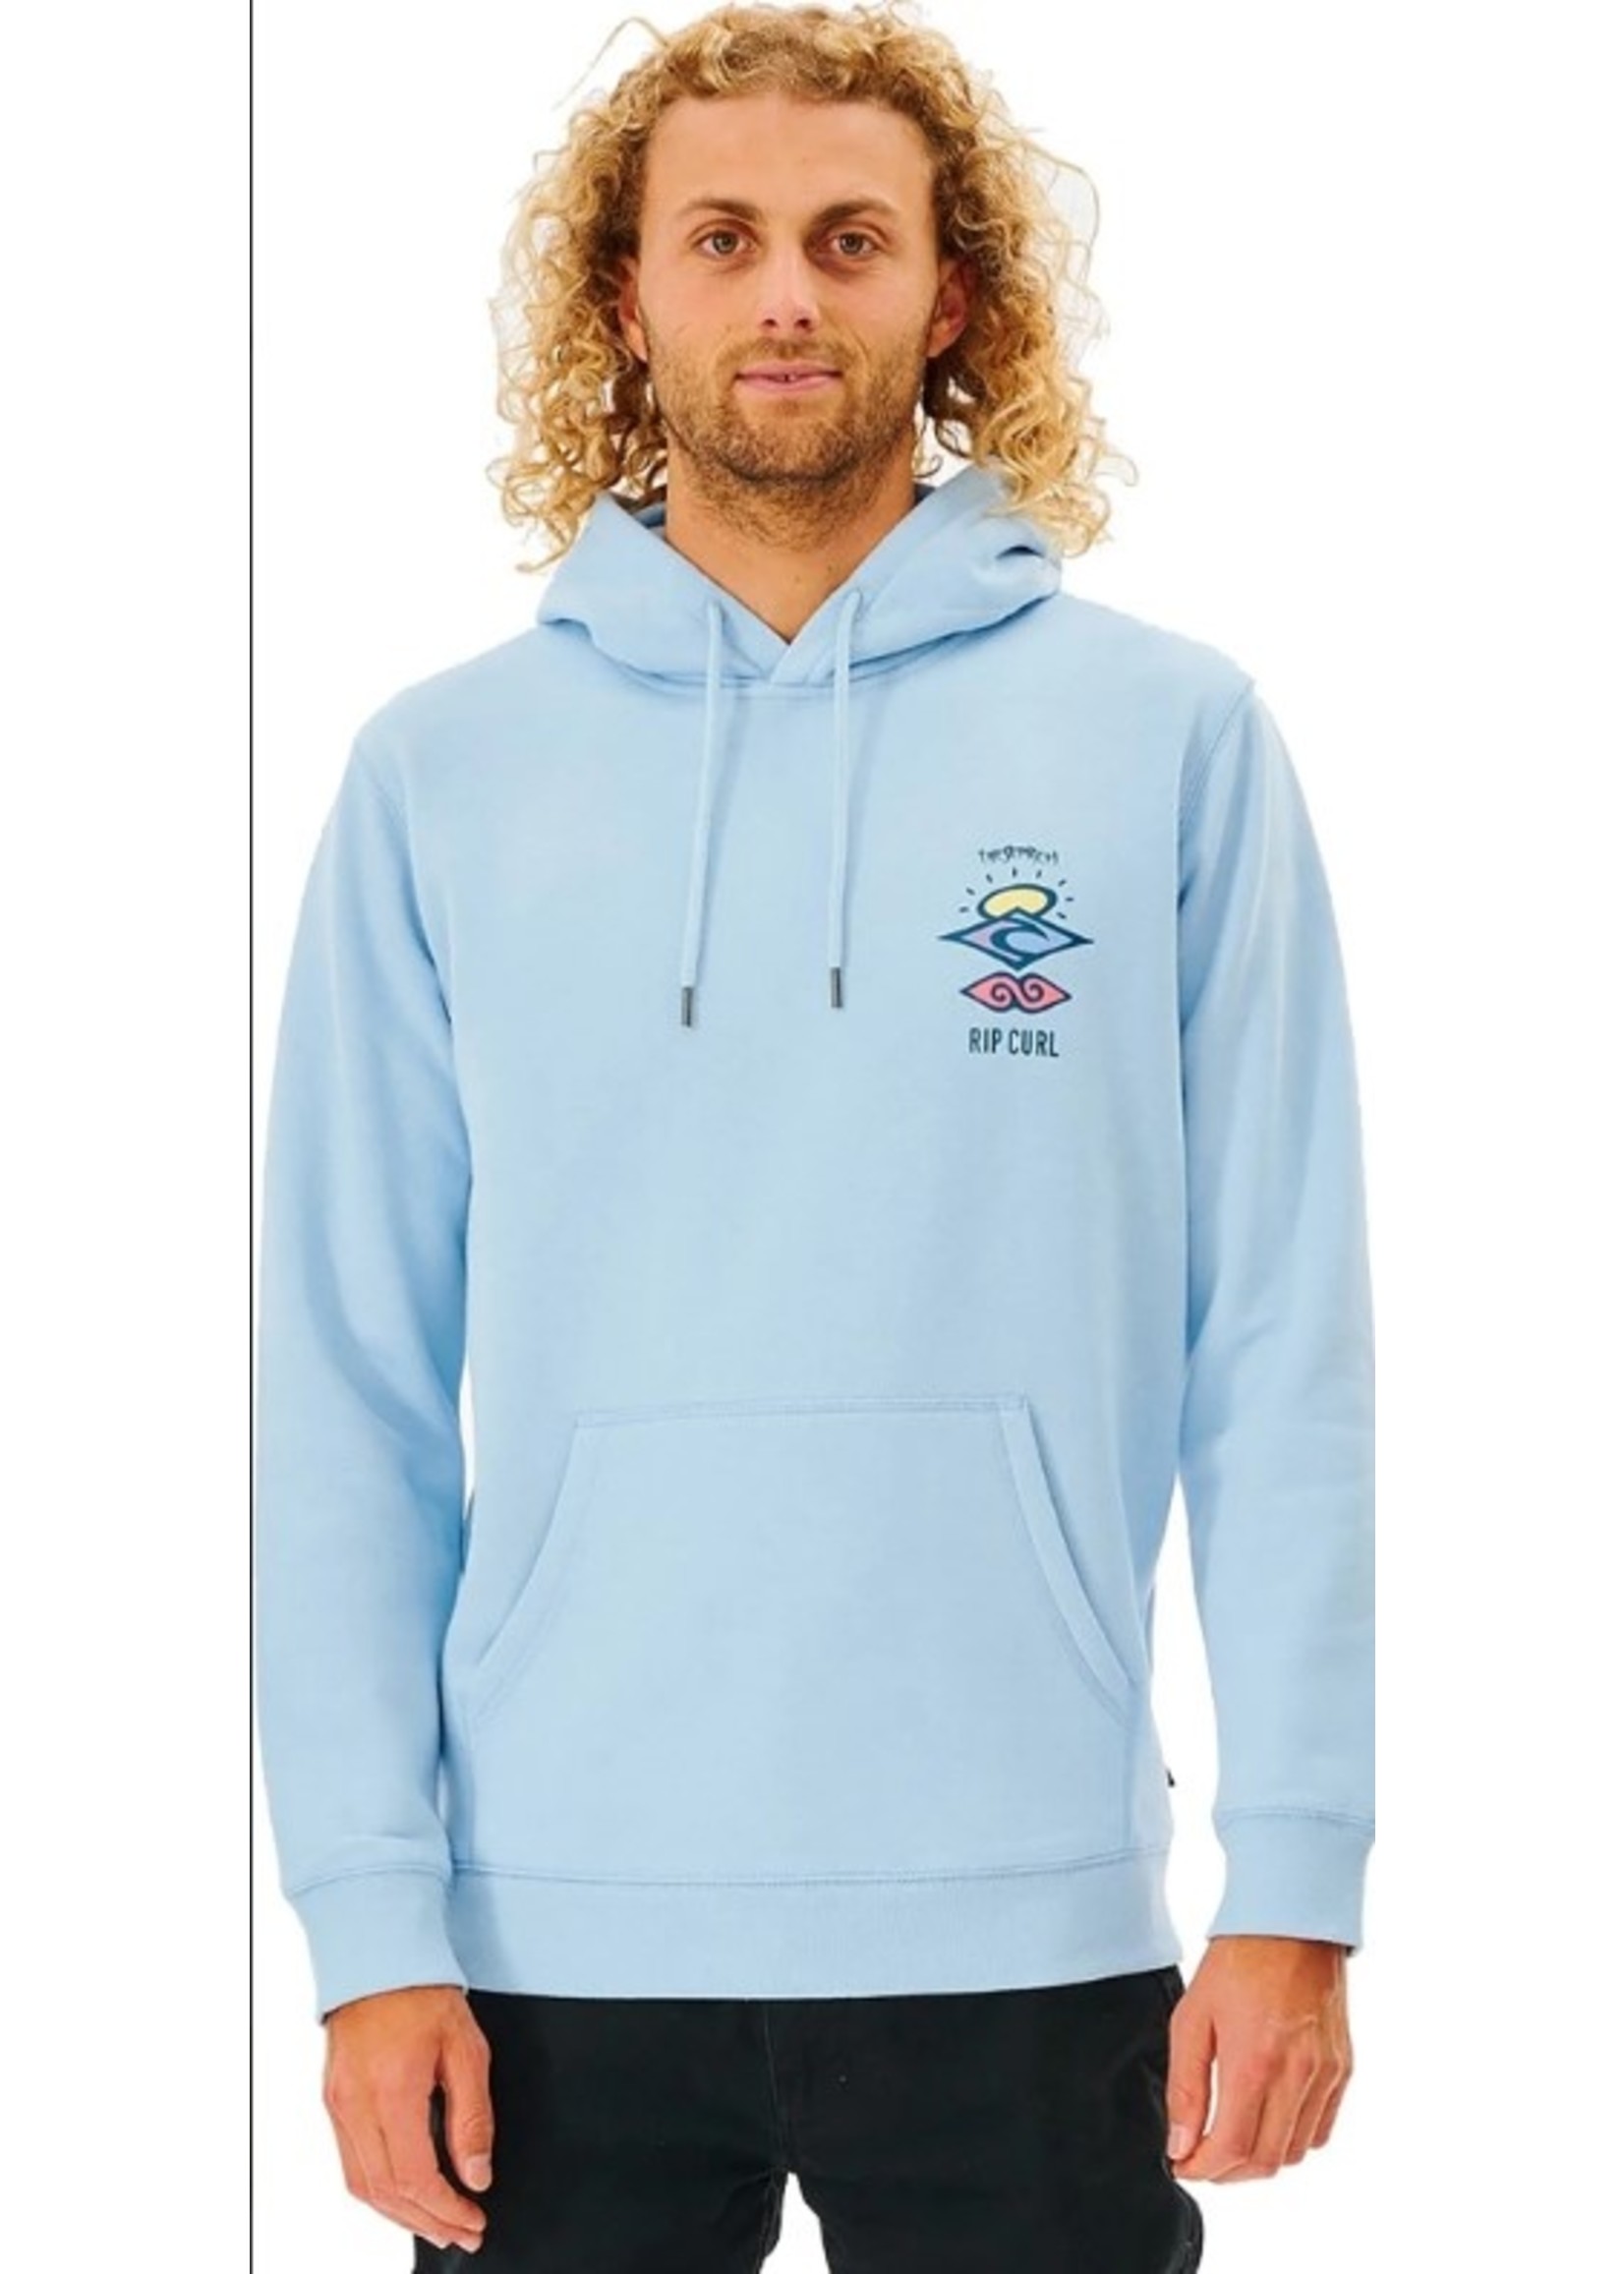 Rip Curl ICONS OF SURF HOODIE S22